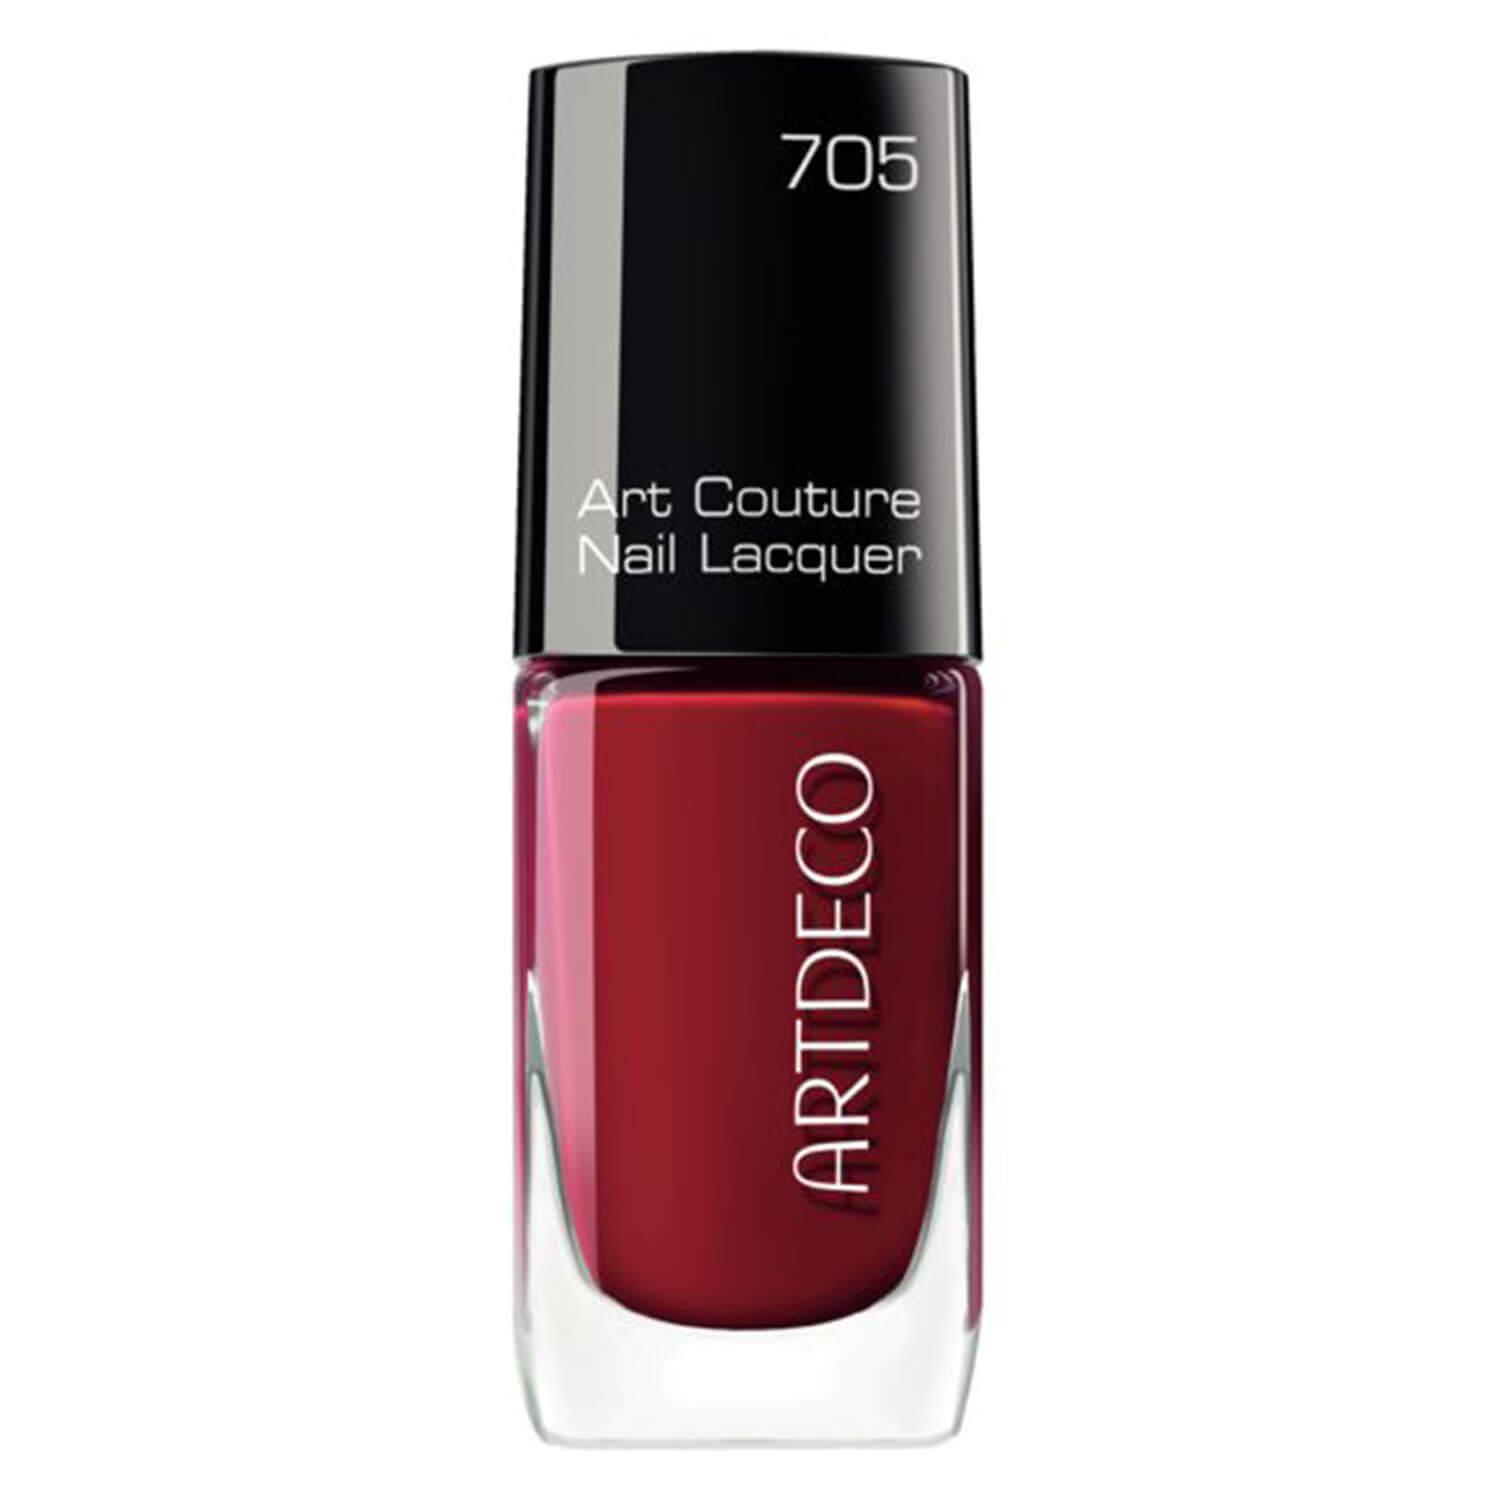 Art Couture - Nail Lacquer Berry 705